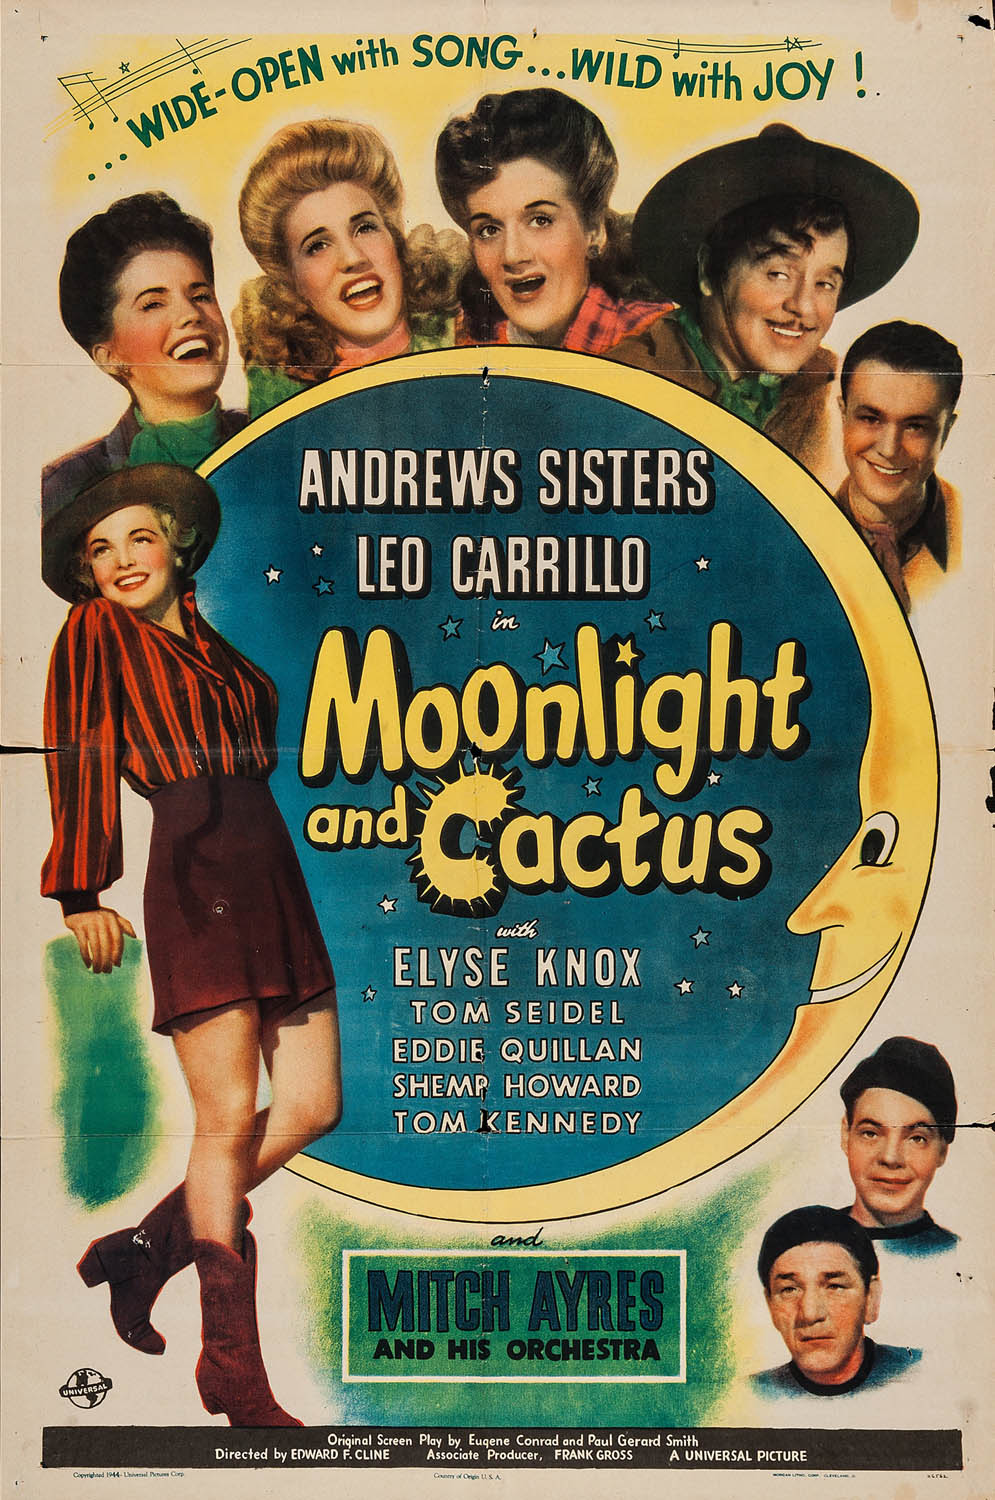 MOONLIGHT AND CACTUS